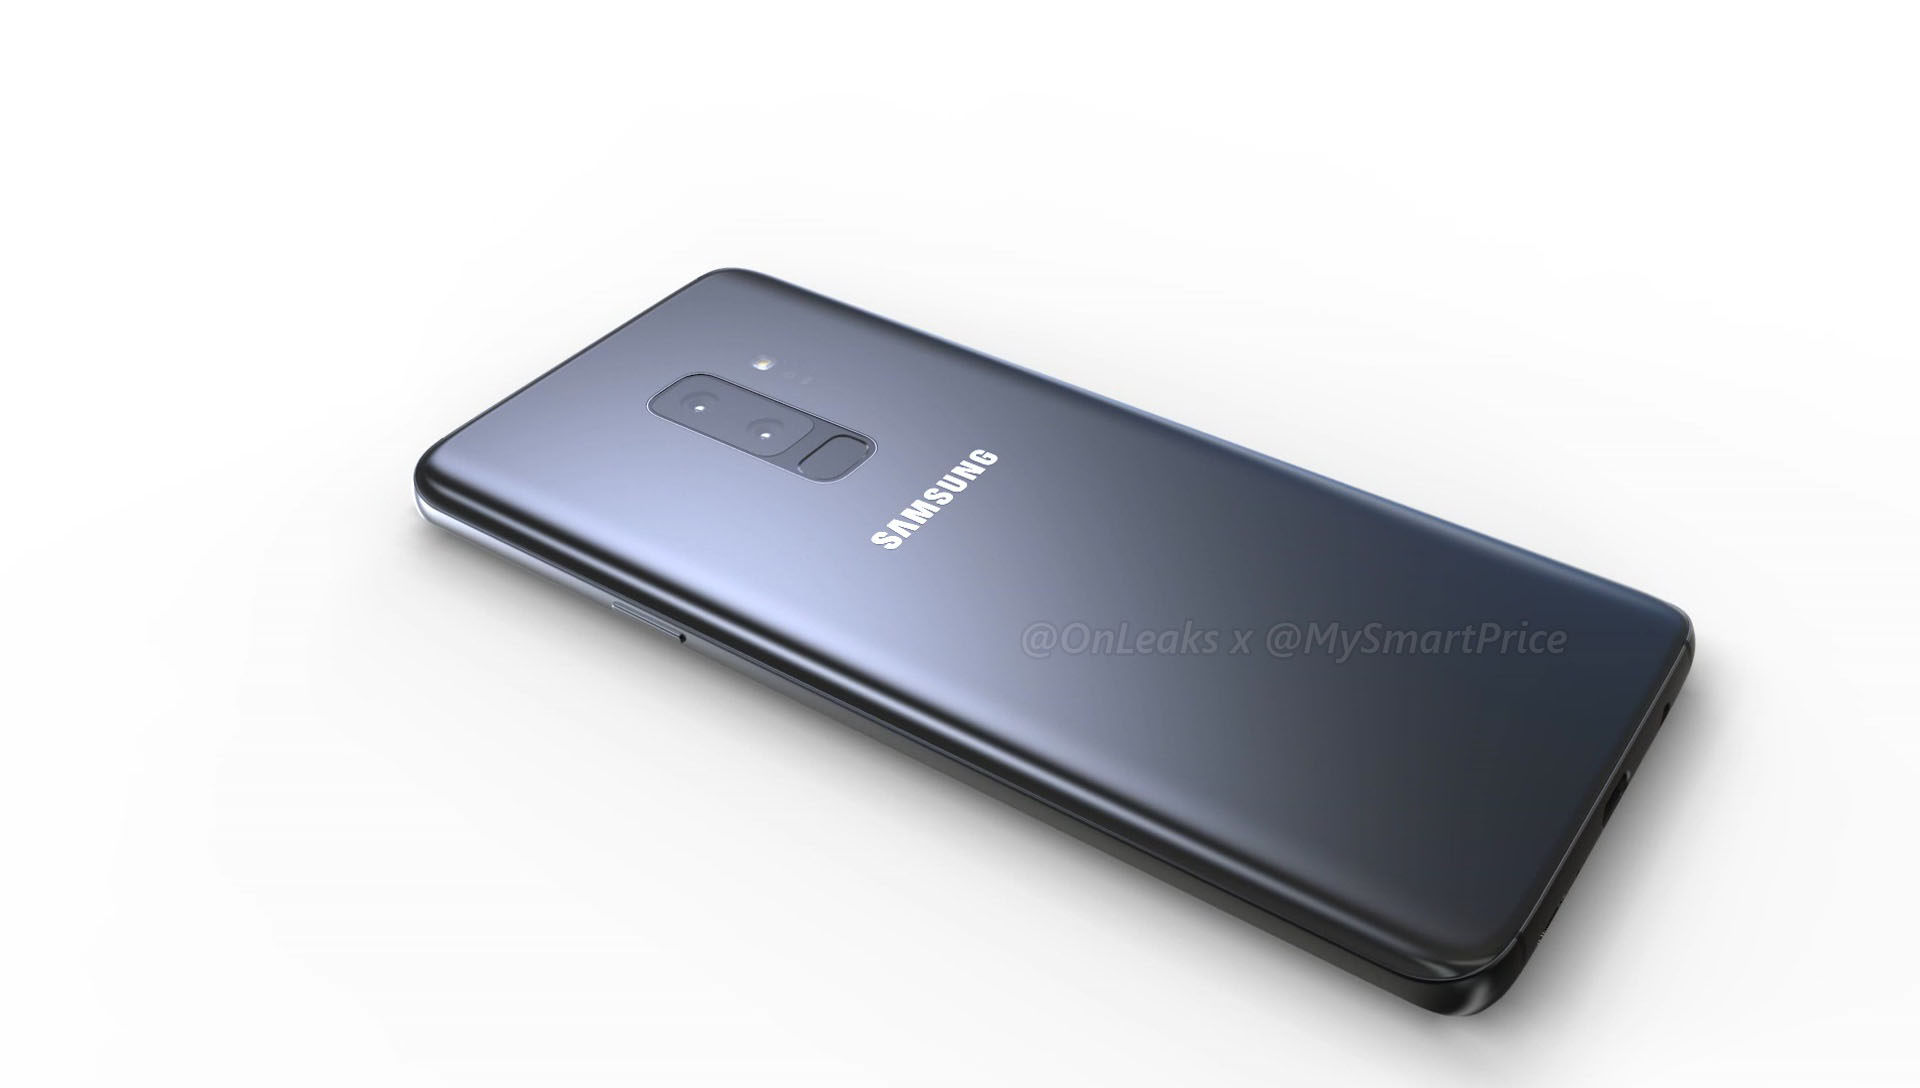 That did not took long - new renders of Samsung Galaxy S9 Plus